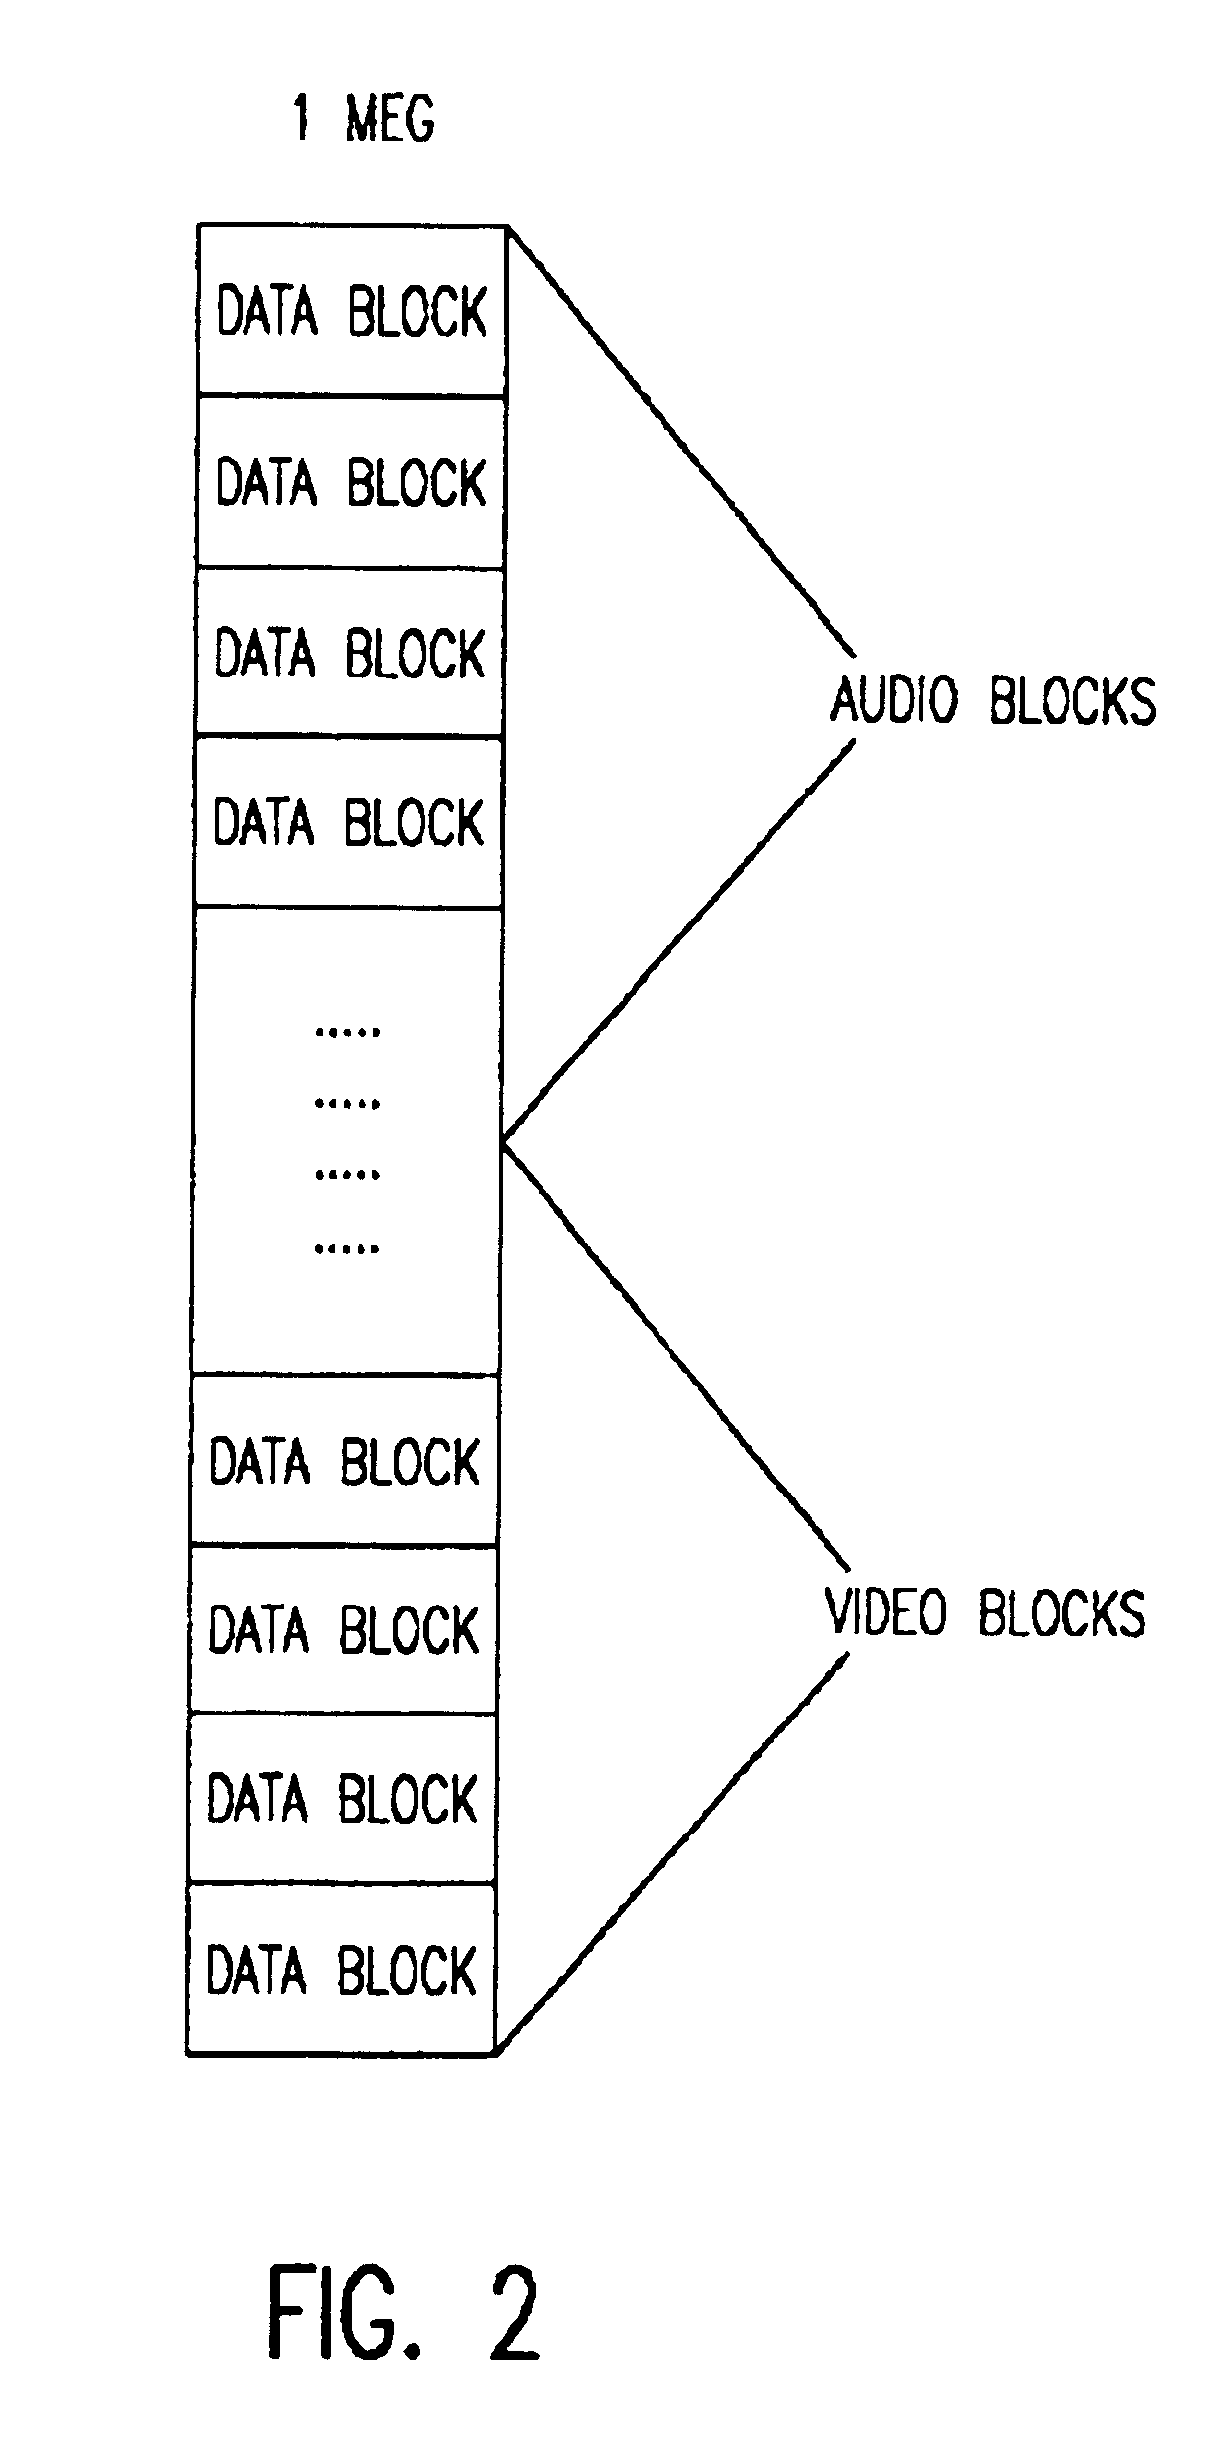 File table copy protection for a storage device when storing streaming content